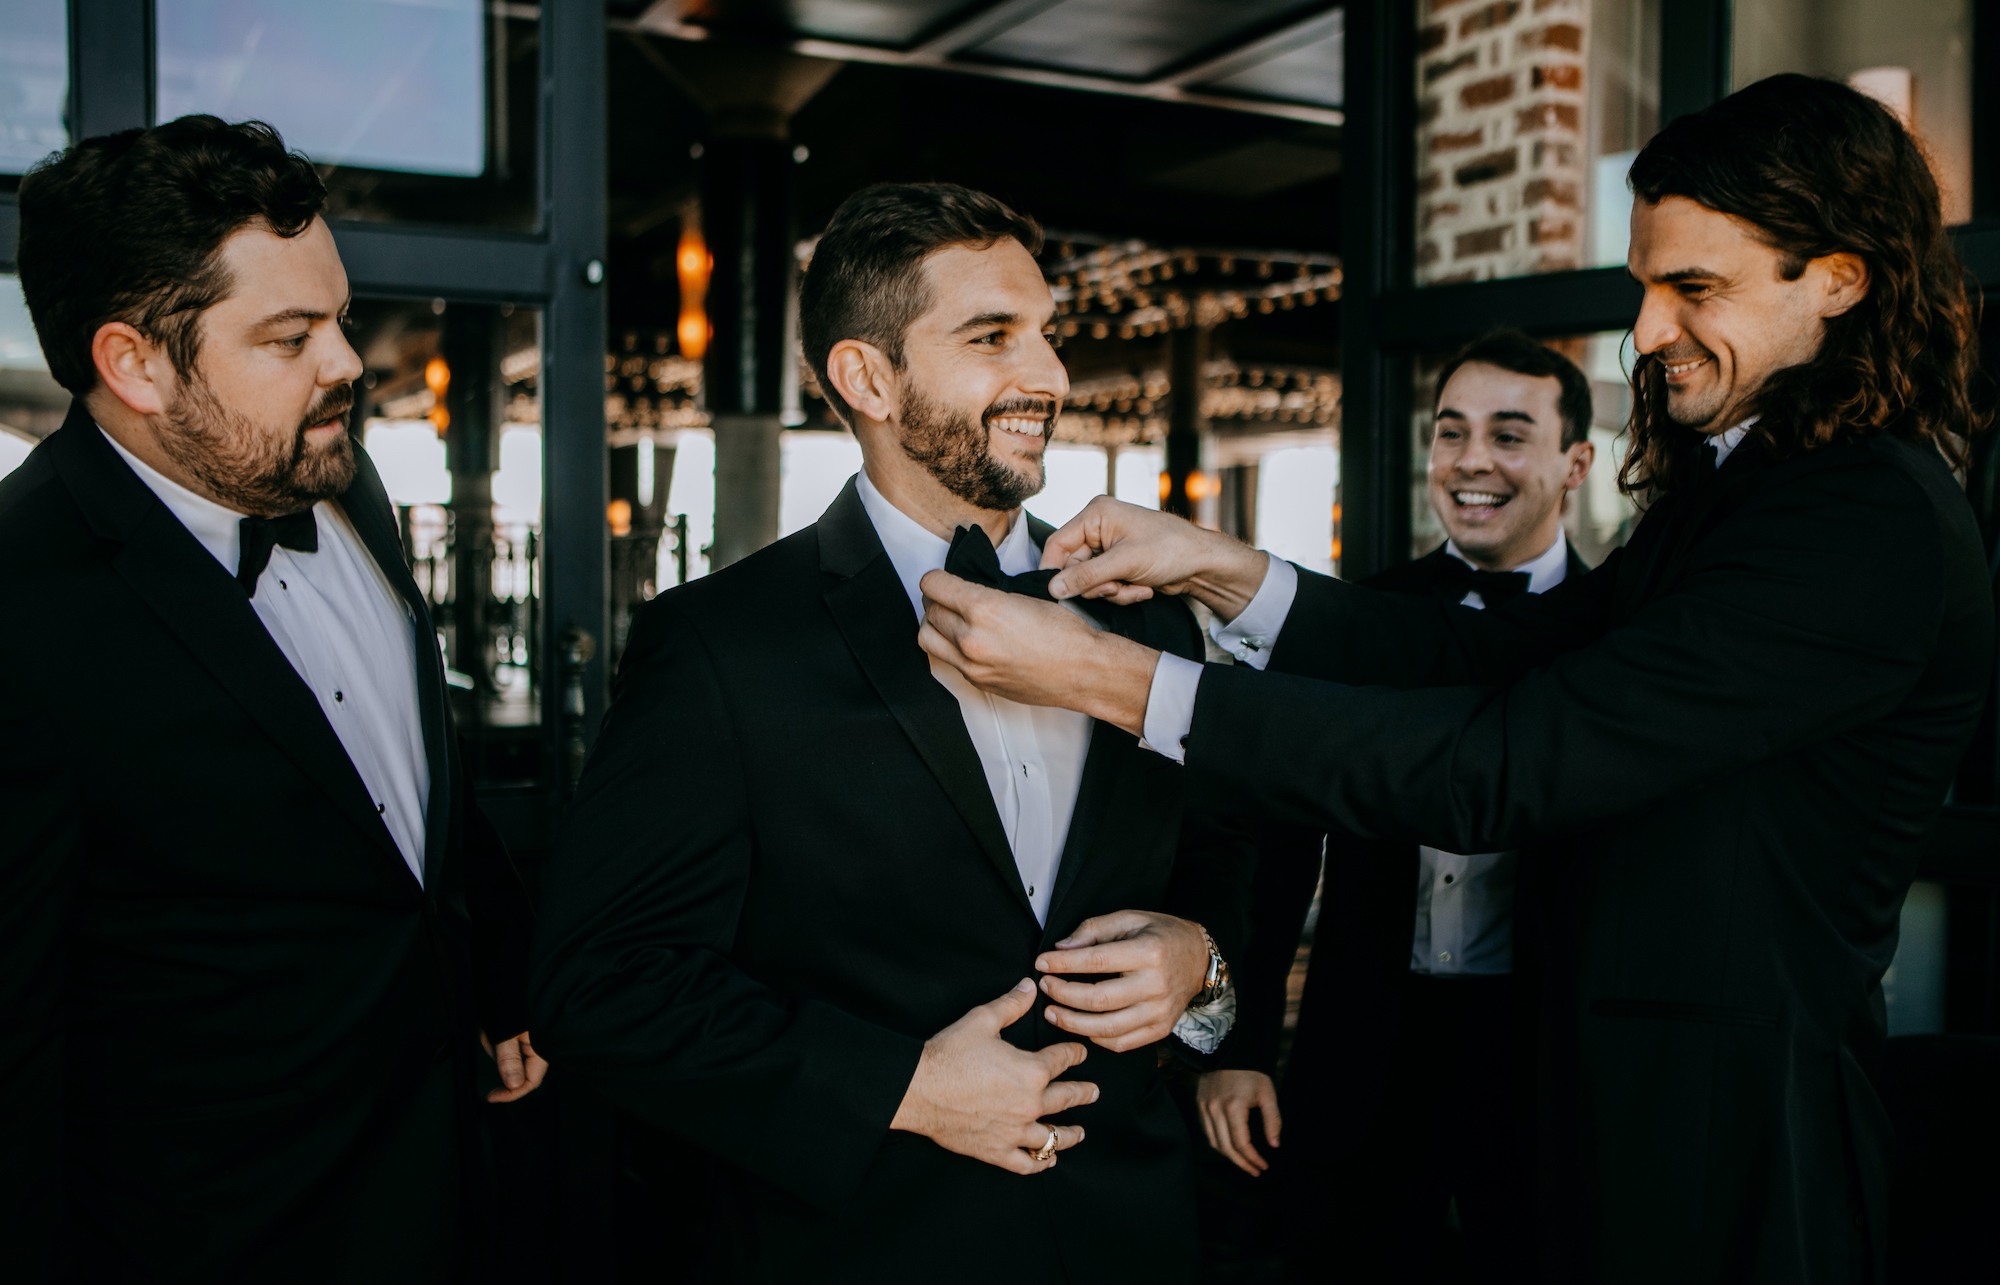 A groom smiles with his groomsmen before his wedding ceremony in Houston, TX.